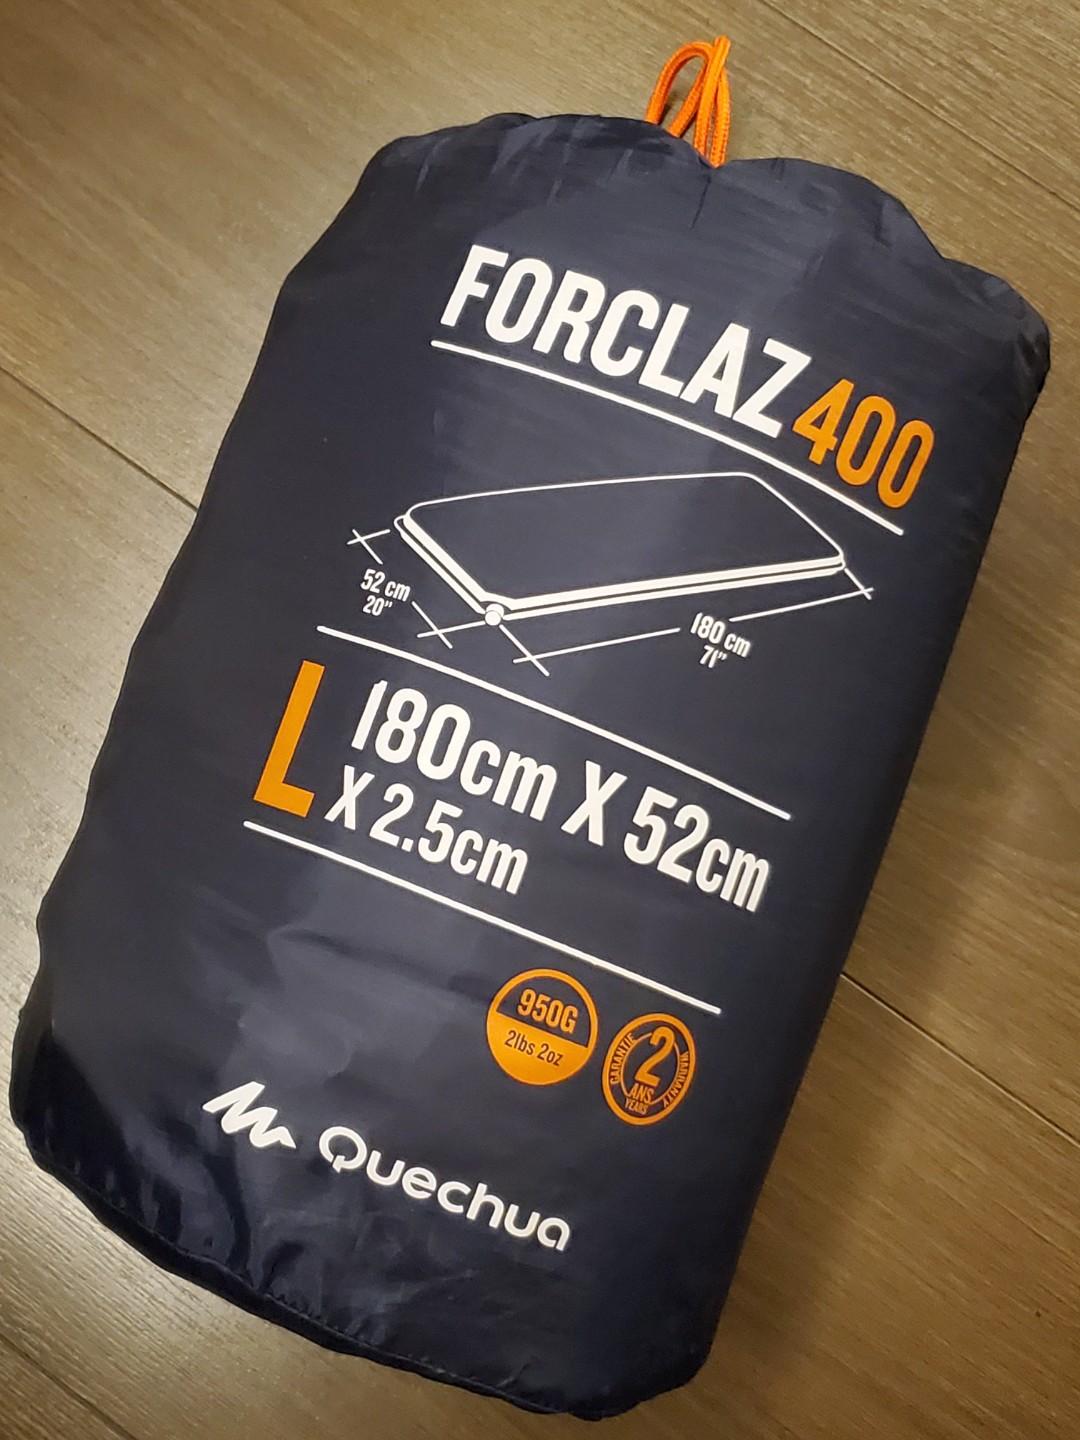 forclaz 500 self inflating